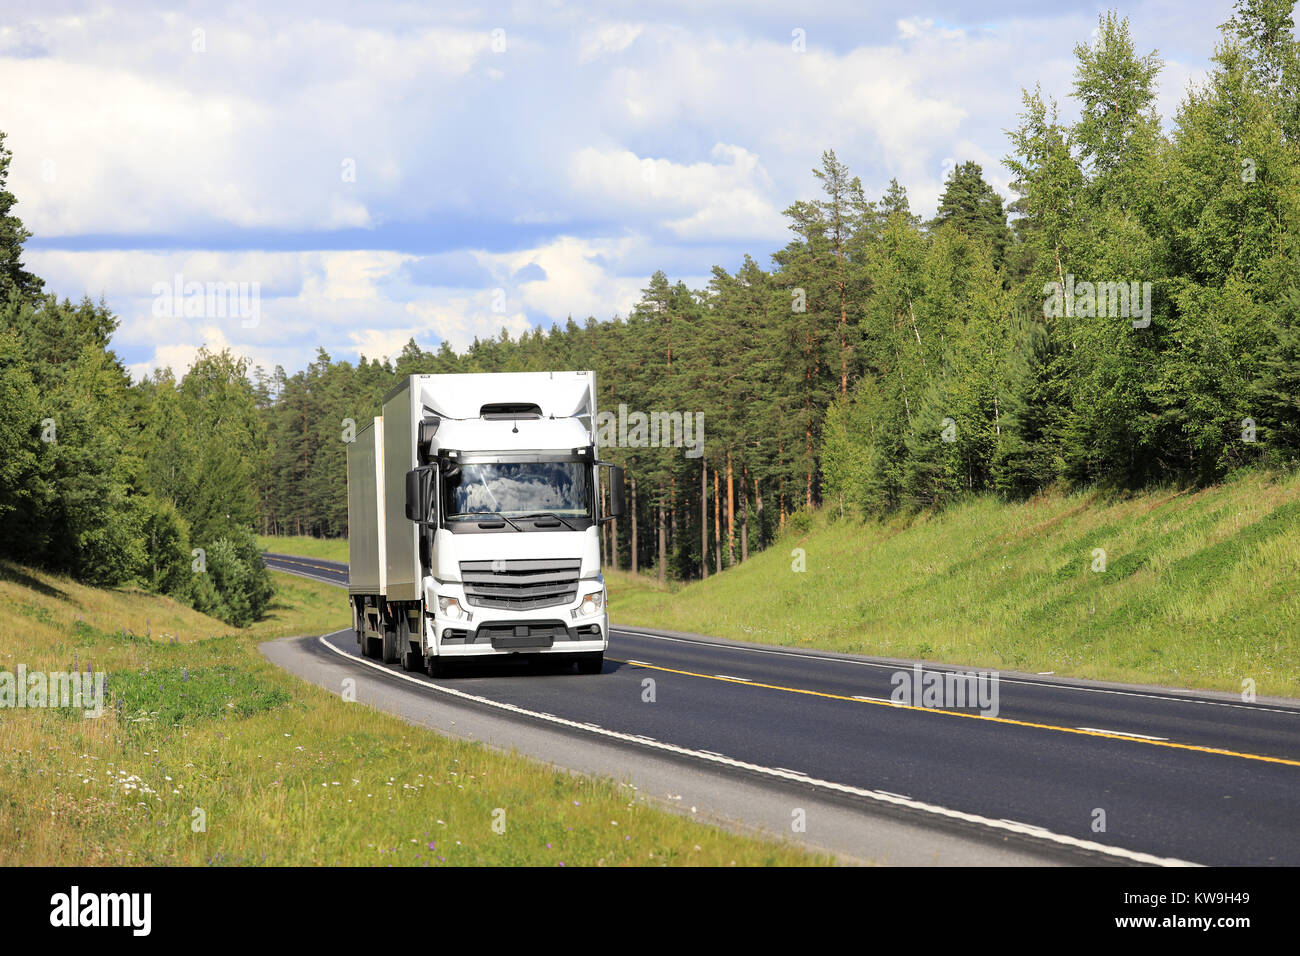 White cargo truck transports goods along highway through green rural scenery on a beautiful day of summer. Stock Photo